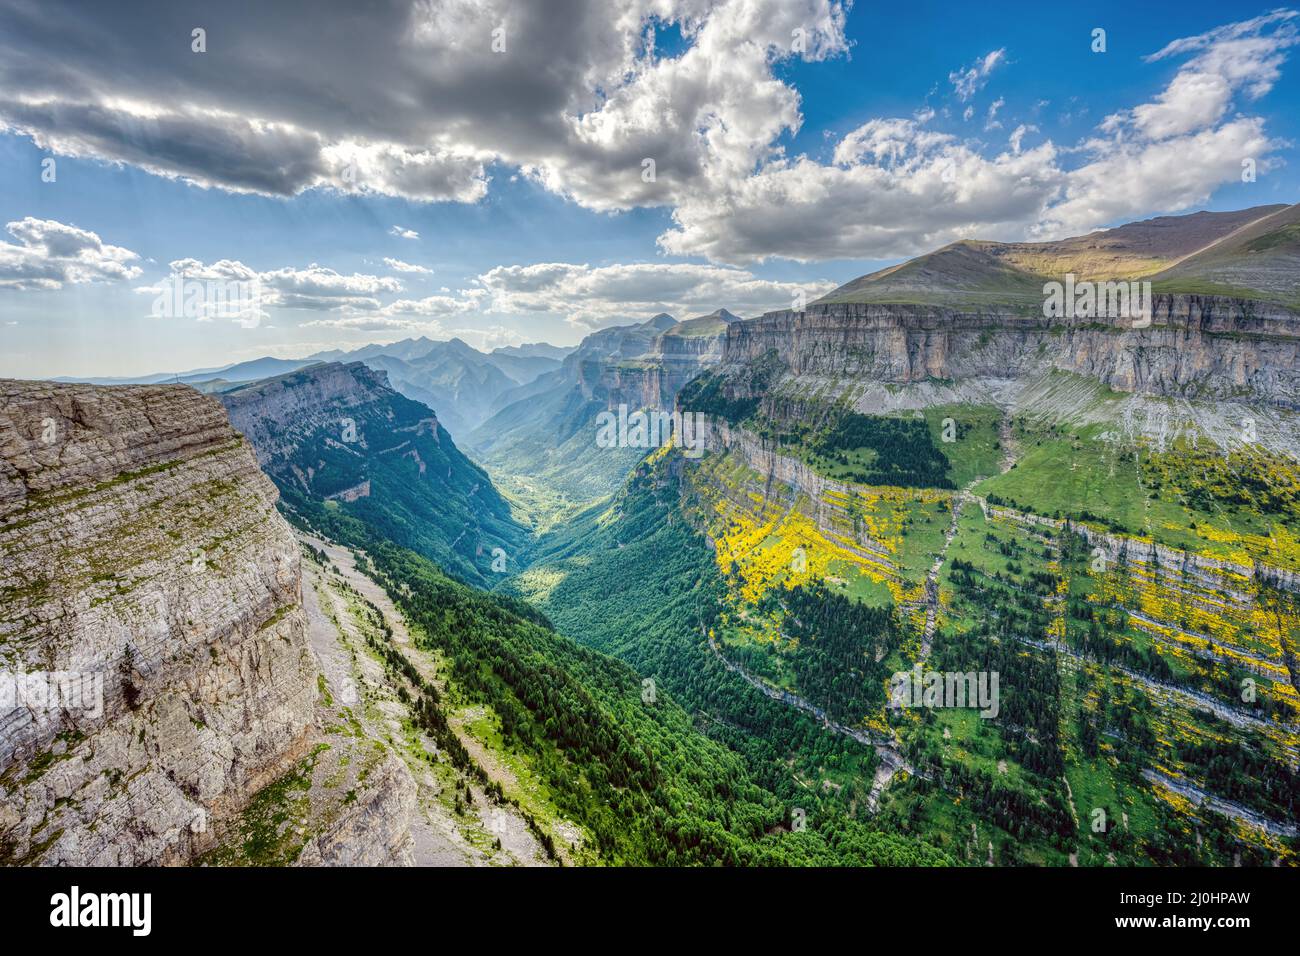 The beautiful Ordesa Valley in the Spanish Pyrenees Stock Photo